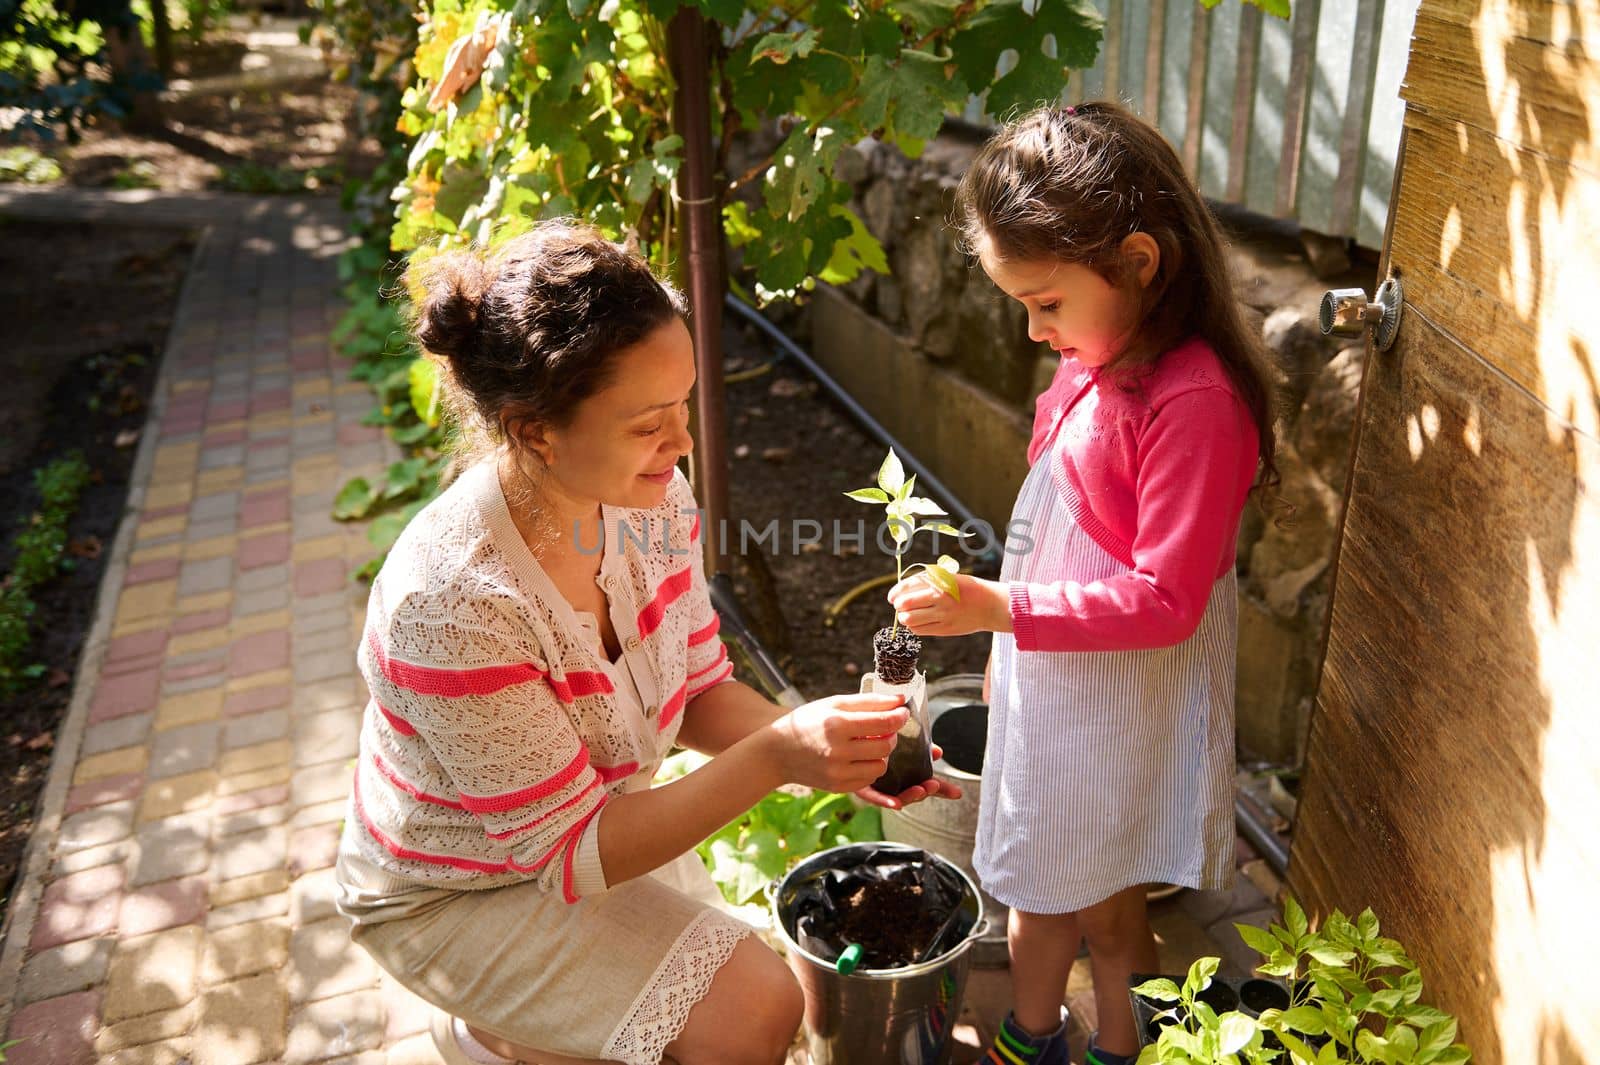 Little girl helps her mother to plant seedlings with sprouted roots during the seeding and planting season in early spring. Sowing Growing Planting Cultivating organic vegetables in eco farm. Farming